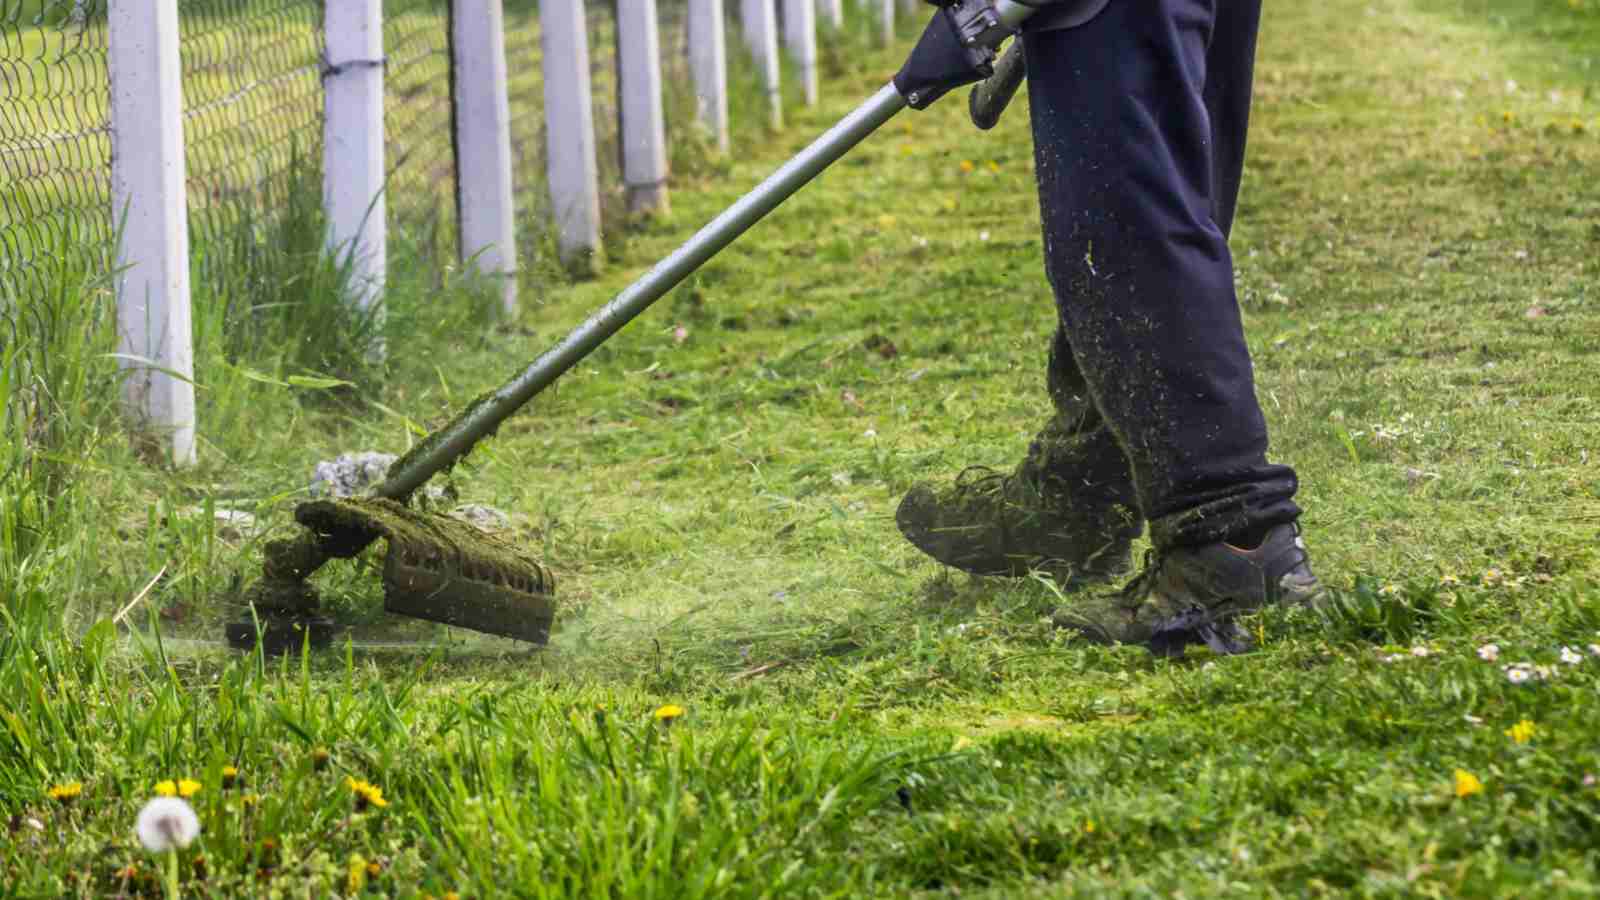 How Much Do Gardeners Charge For Cutting Grass